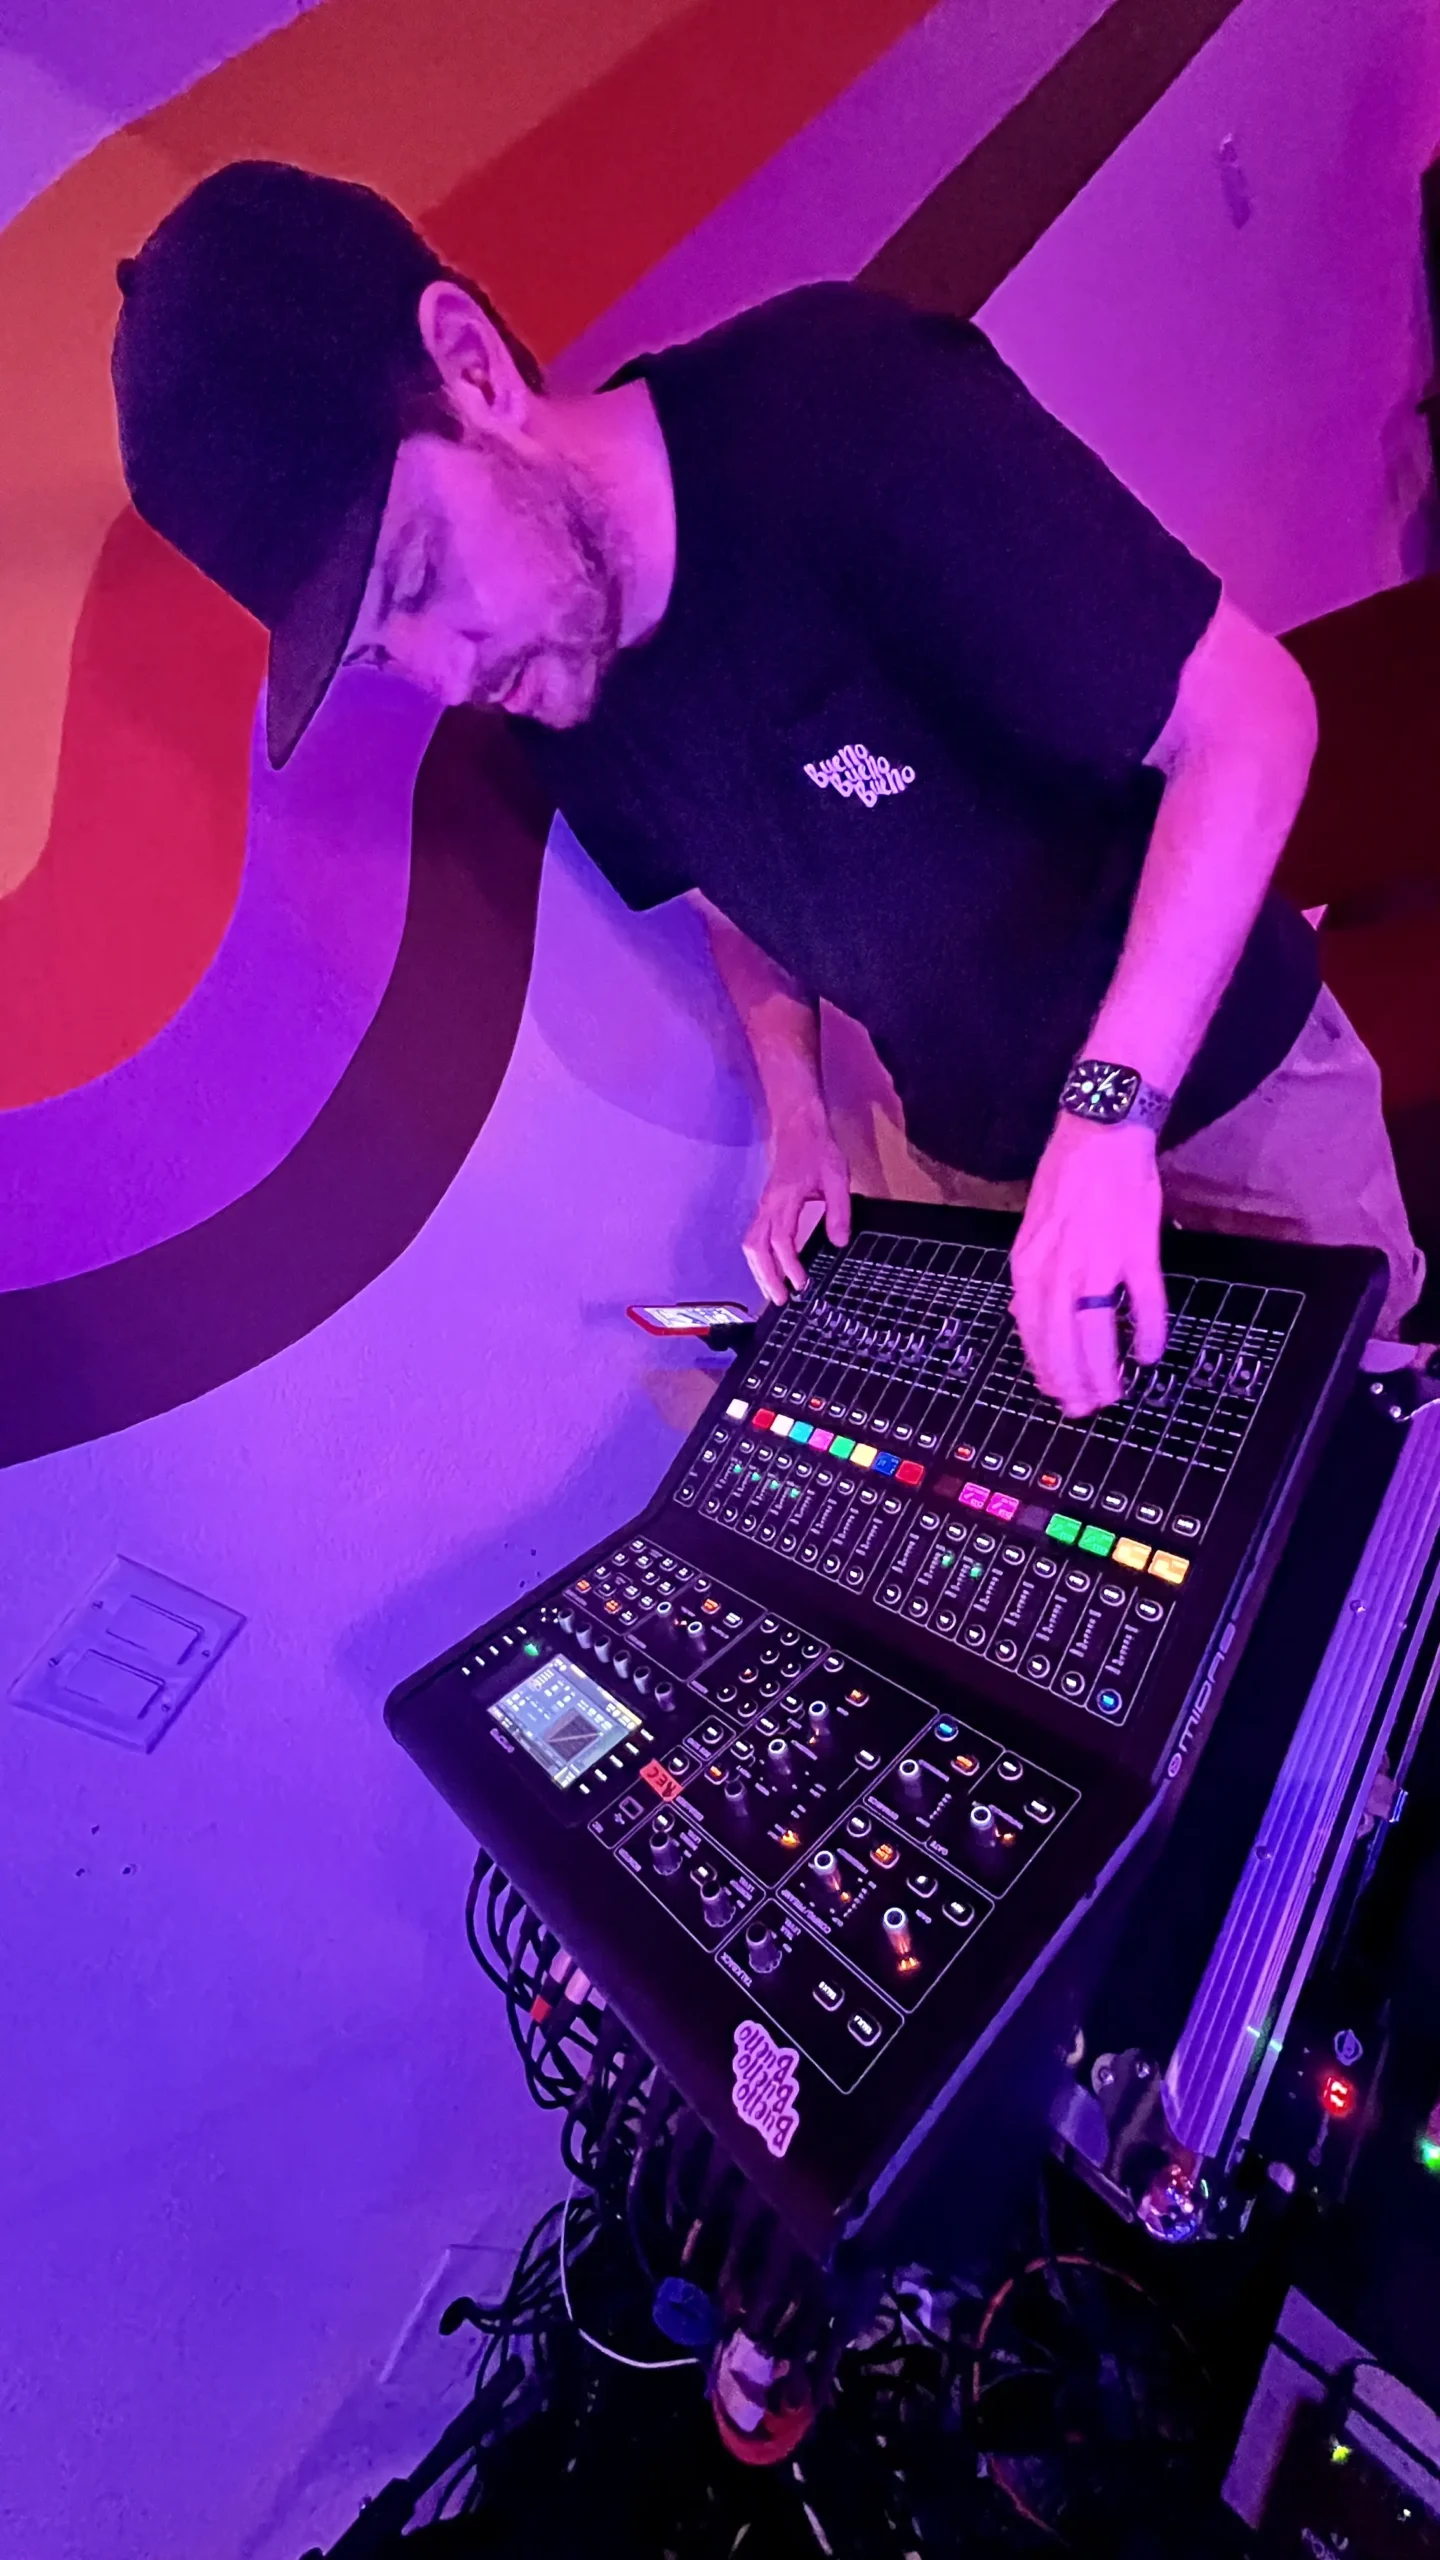 A man adjusting controls on a large electronic music mixer, lit by purple ambient lighting. he wears a cap and a black shirt.